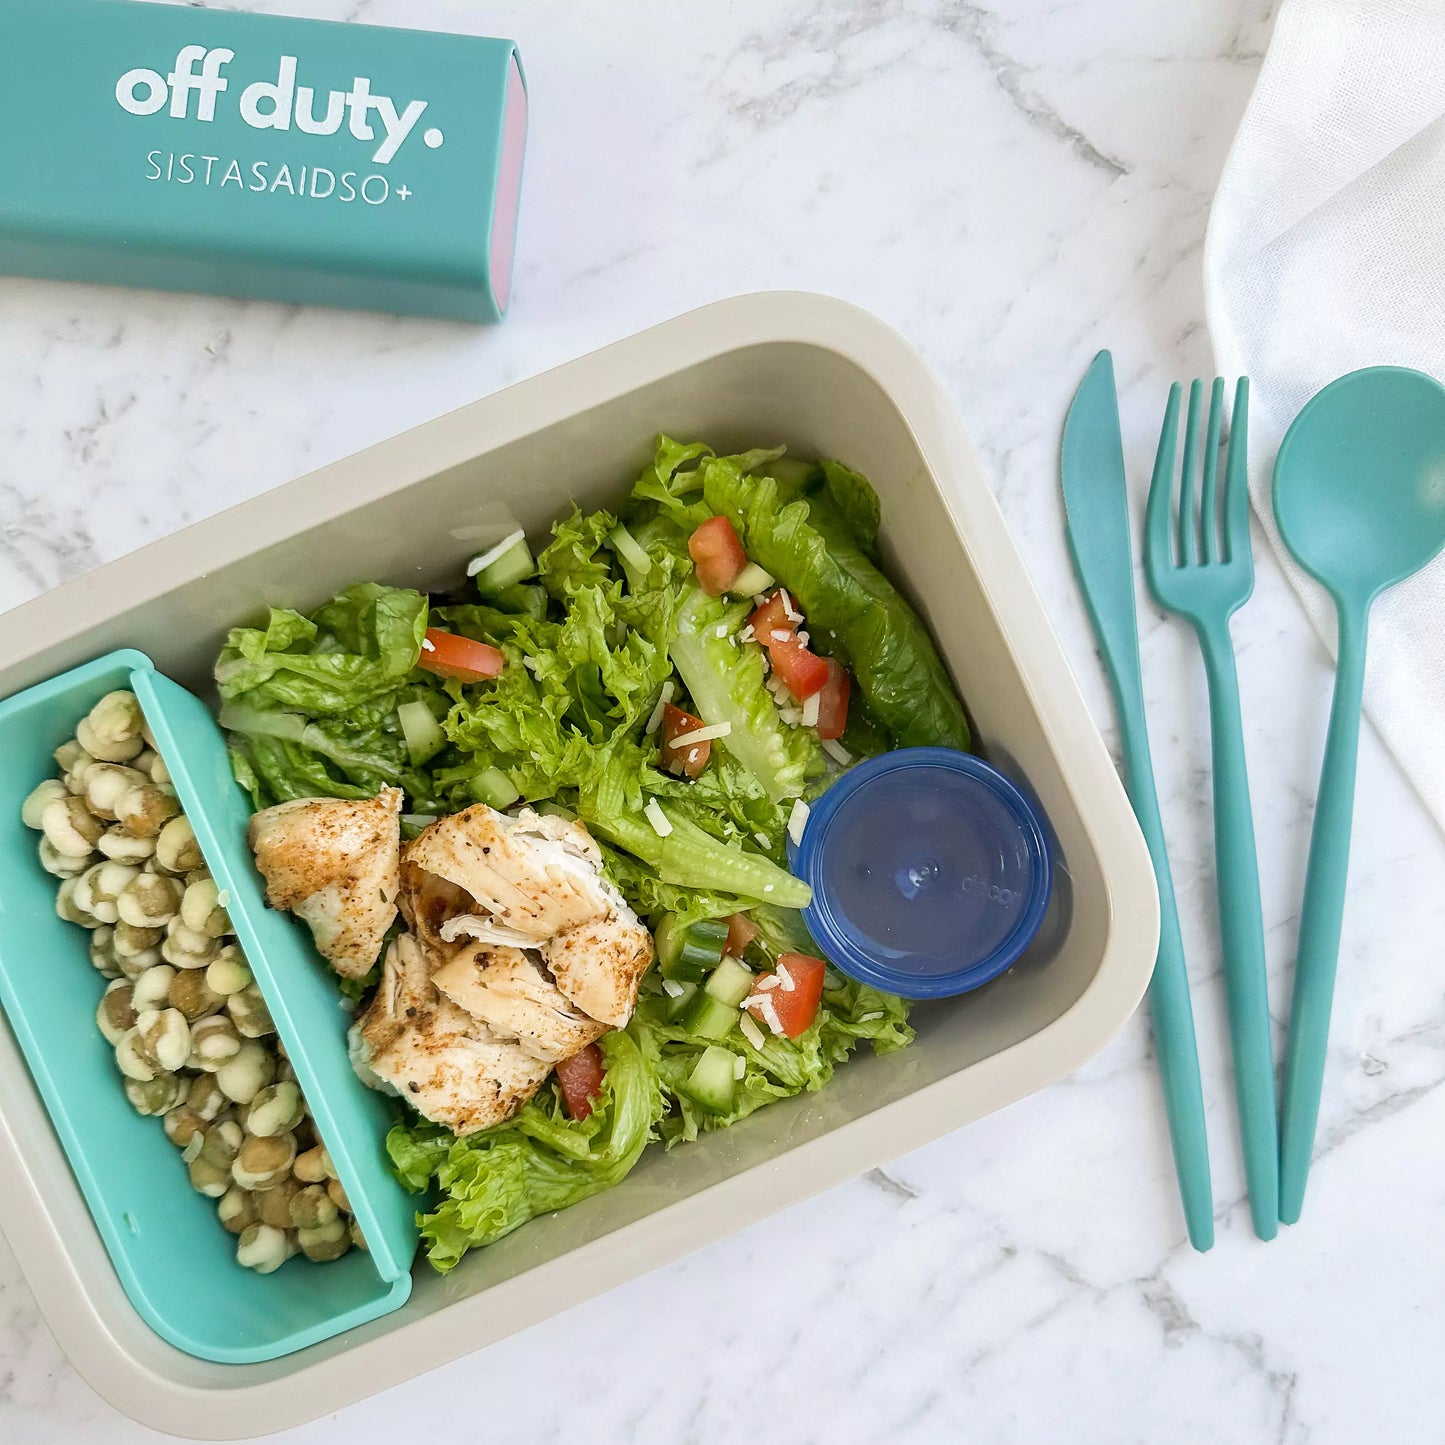 Reusable cutlery set in teal with chicken salad.